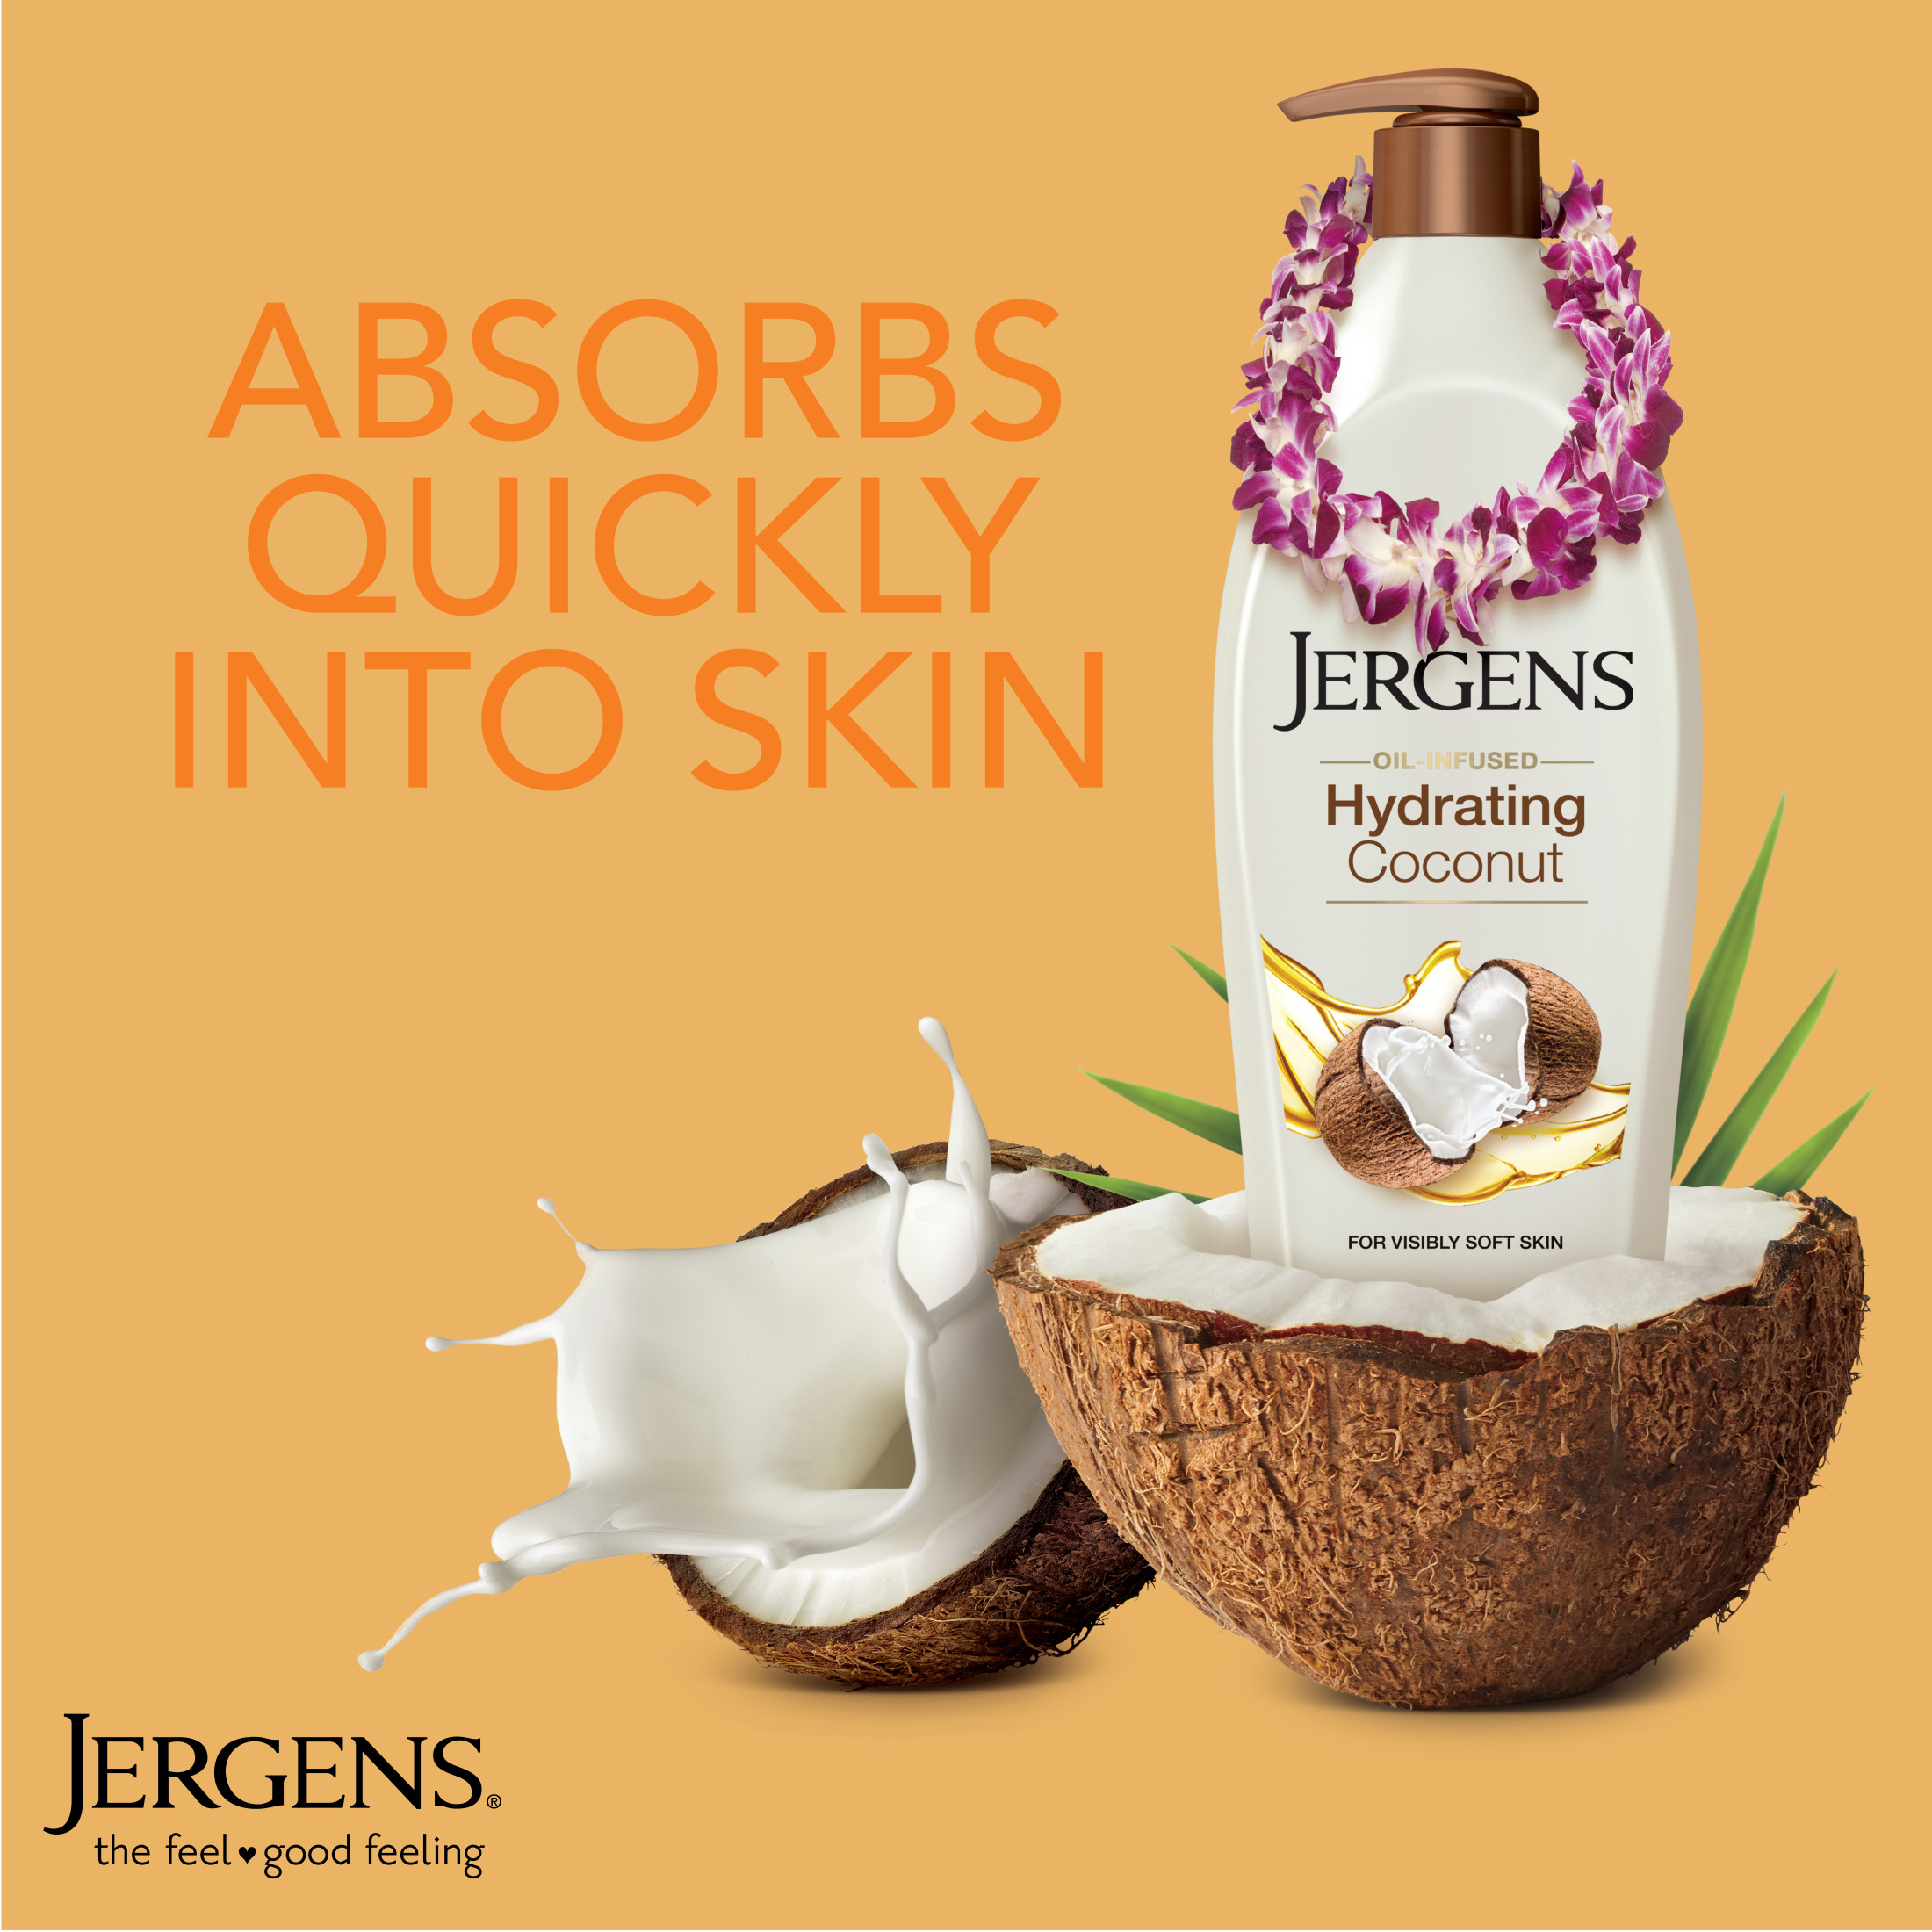 Jergens Hydrating Coconut Body Lotion, Lotion for Dry Skin, Dermatologist Tested, 26.5 Oz - image 3 of 10